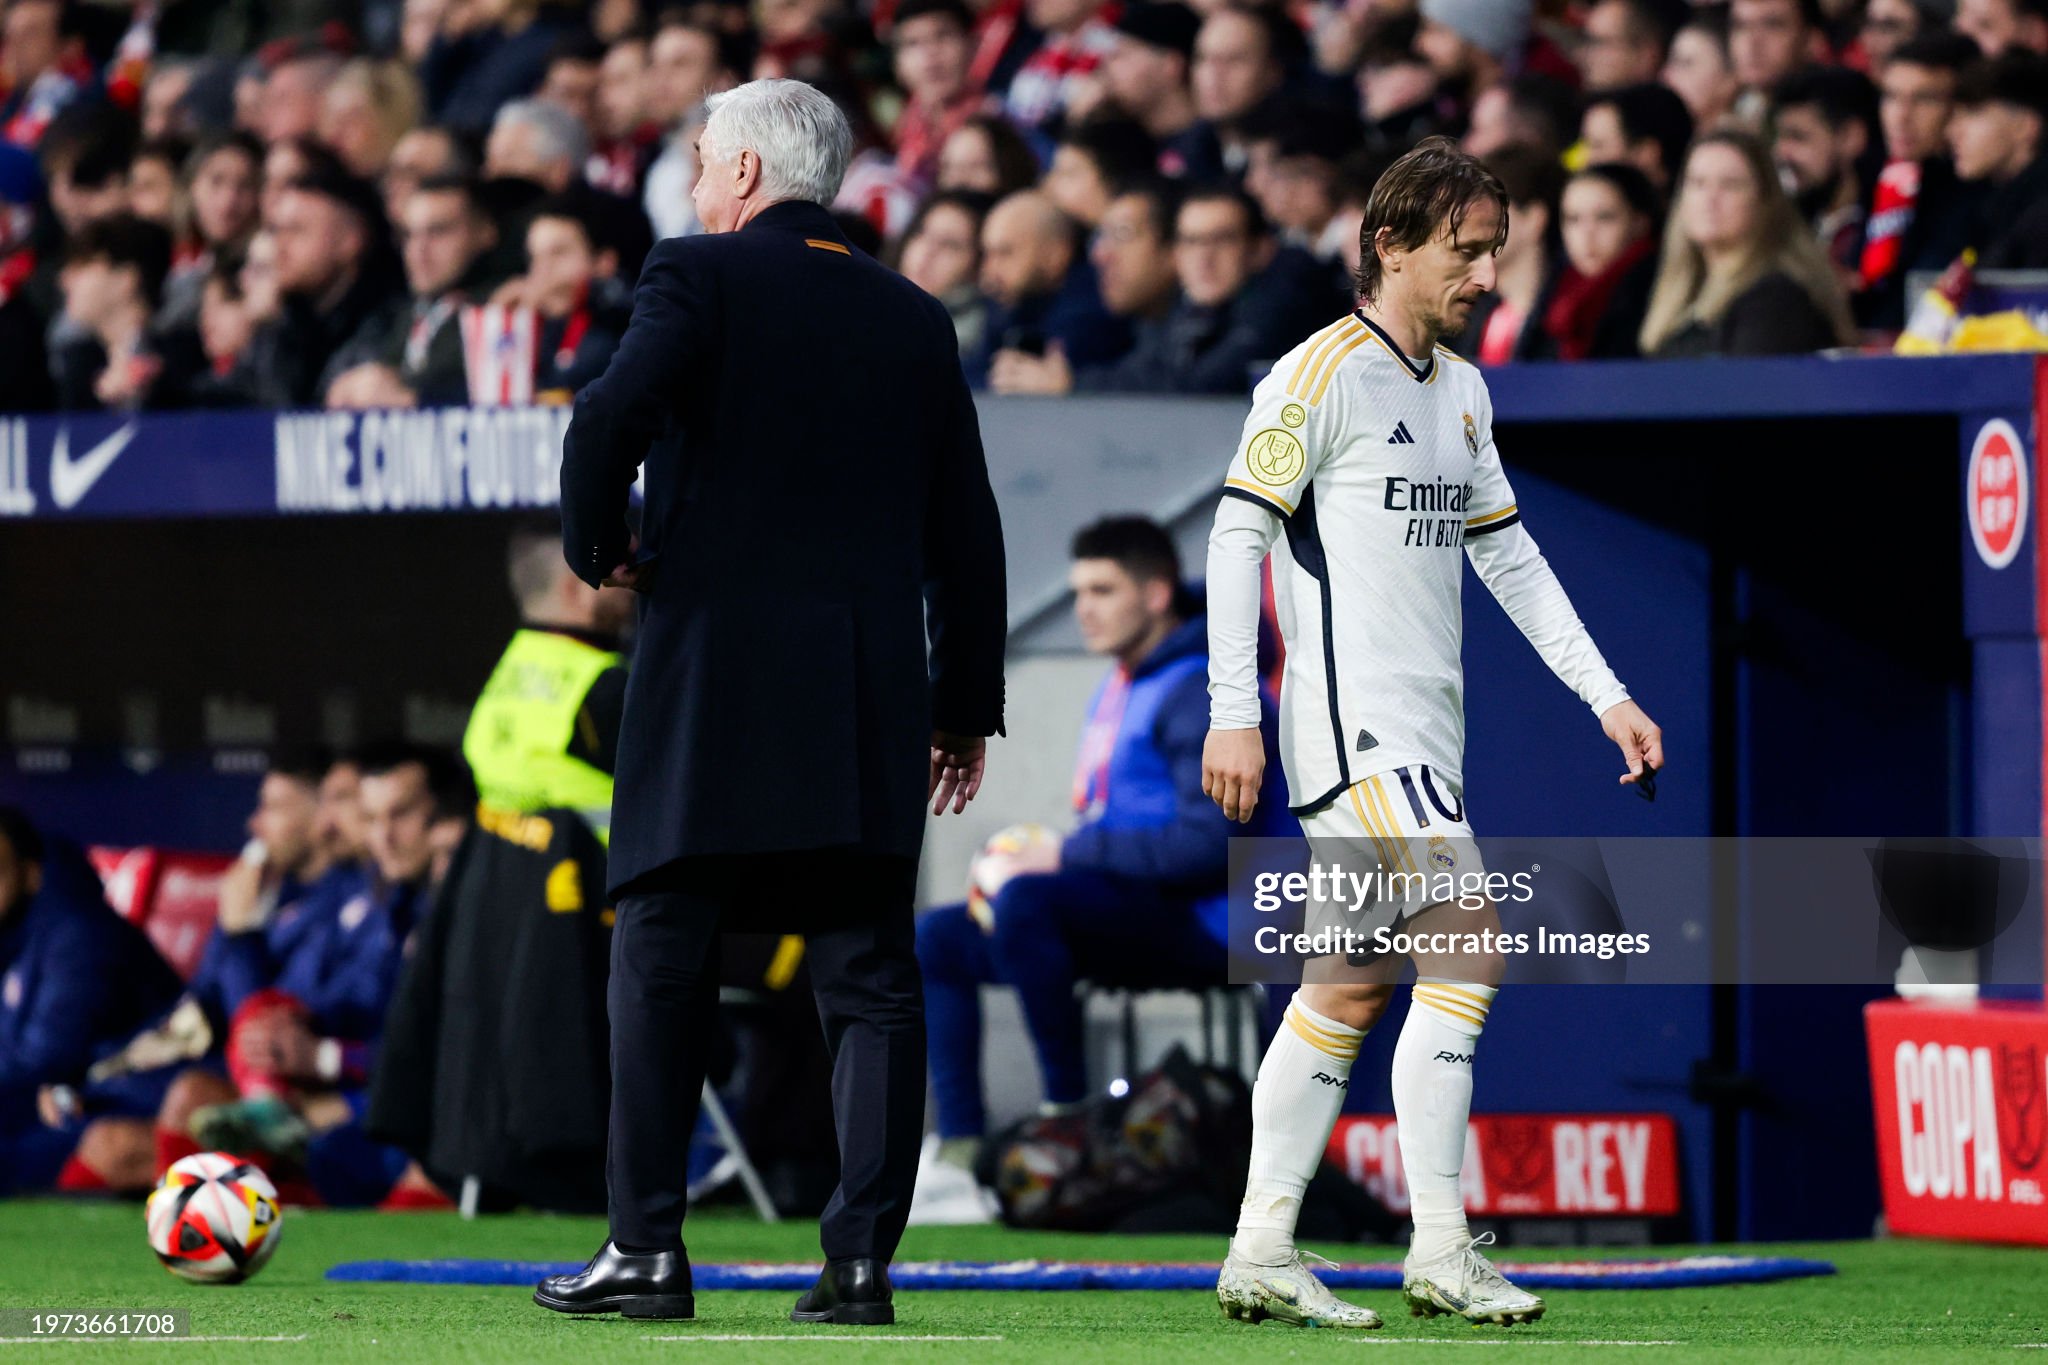 Ancelotti has a new role in mind for the hesitant Modric